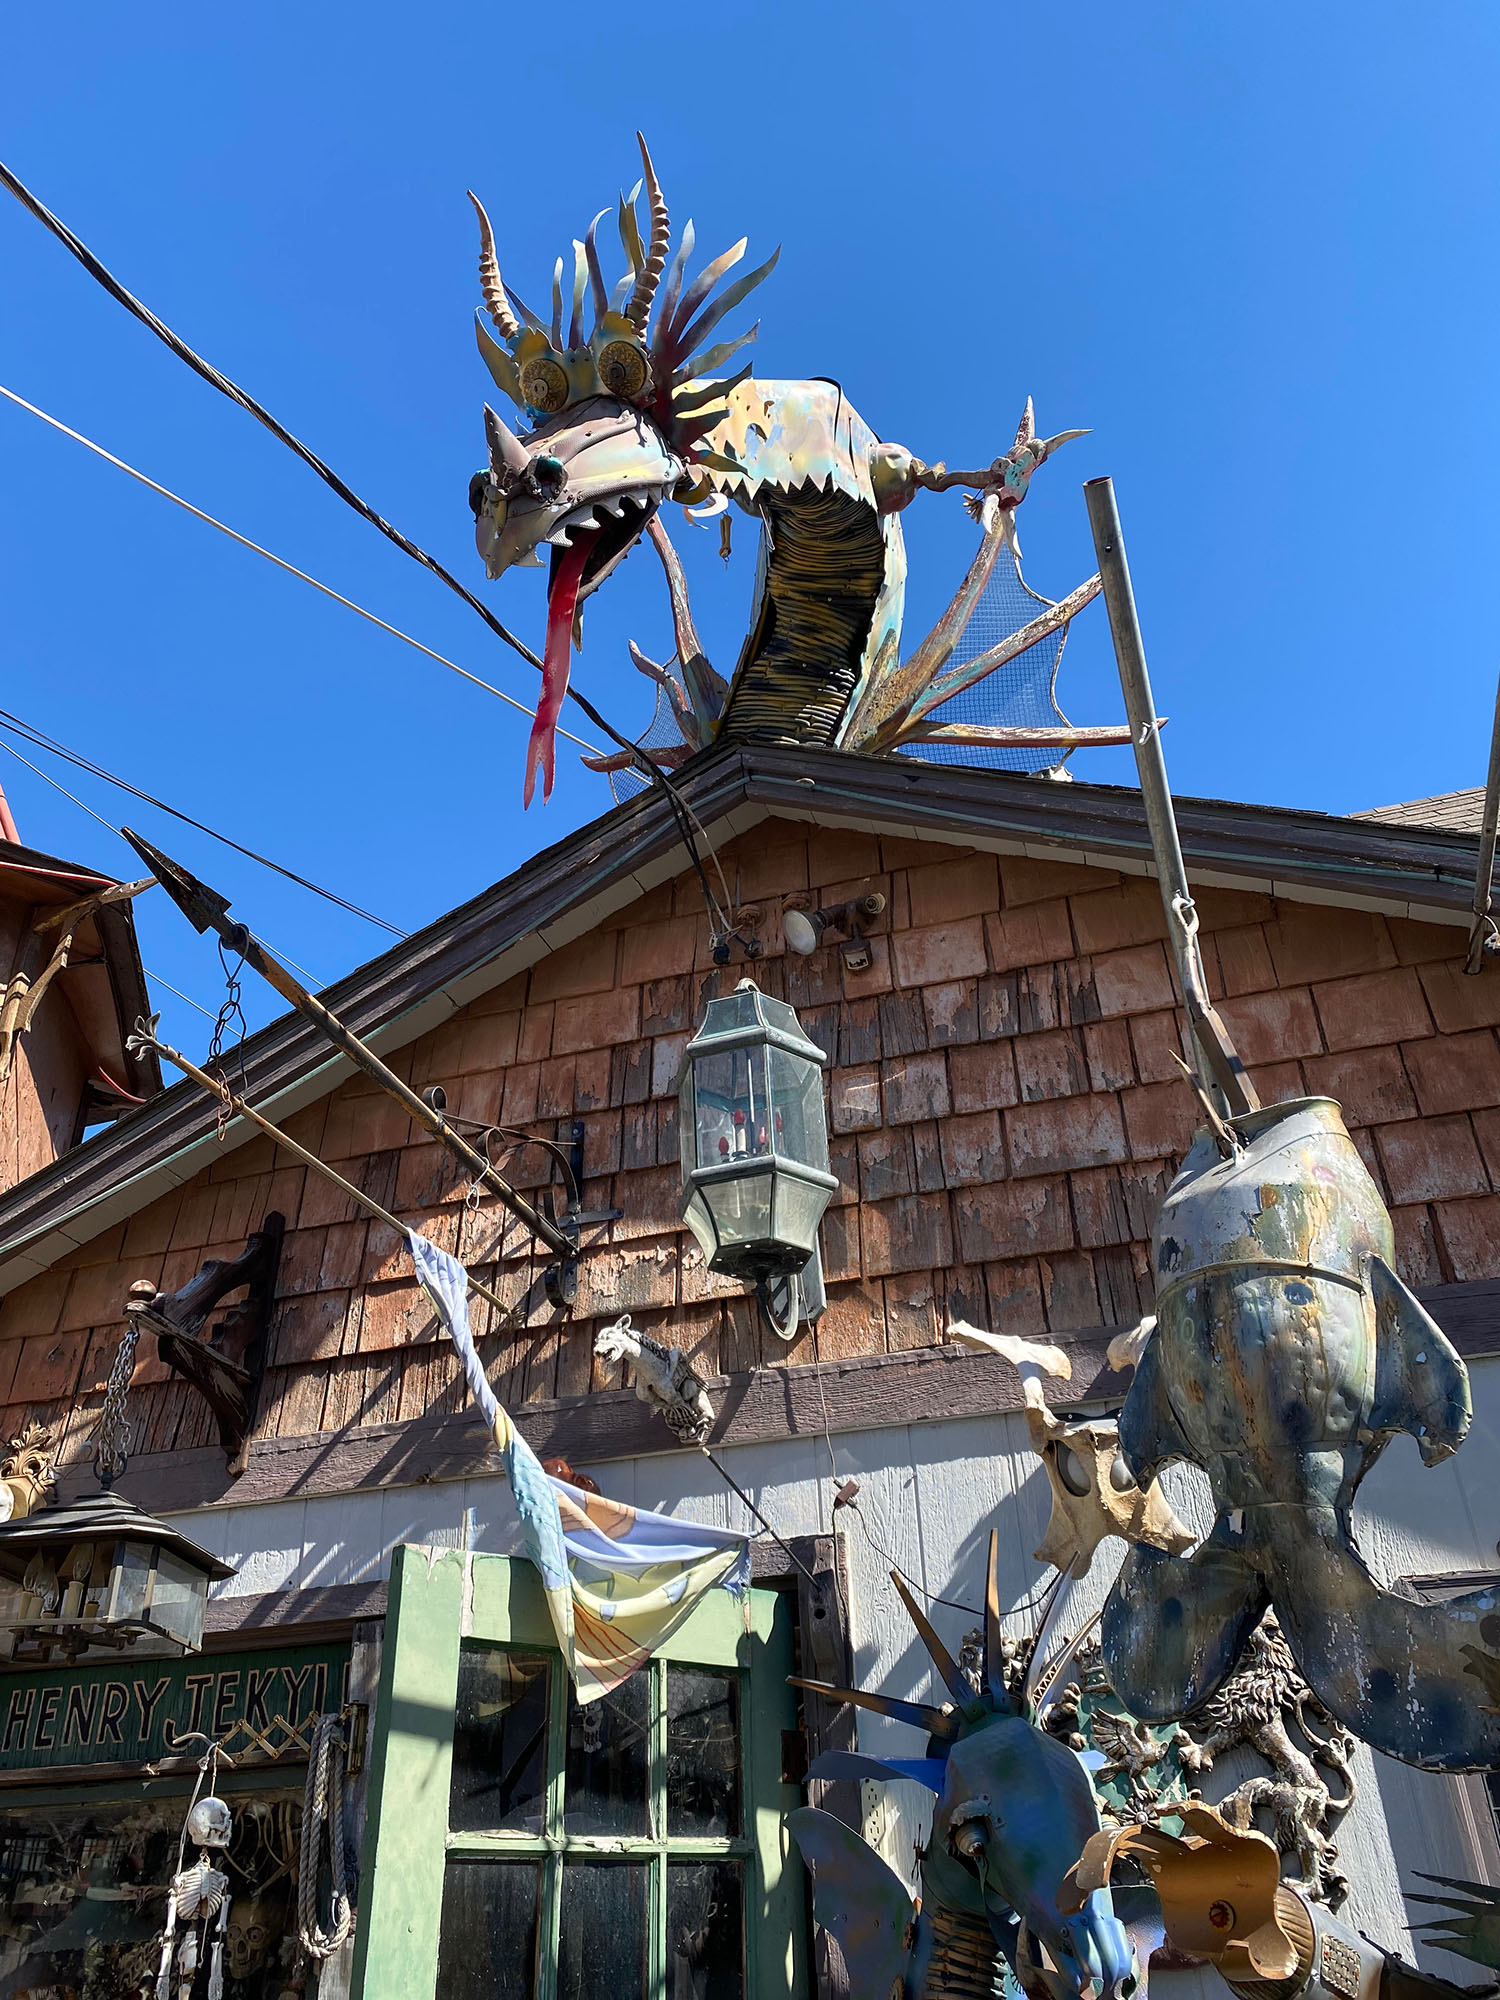 Sculpture of a dragon on top of a building at Gary Pendergrass' steampunk art installation in Wichita, Kansas